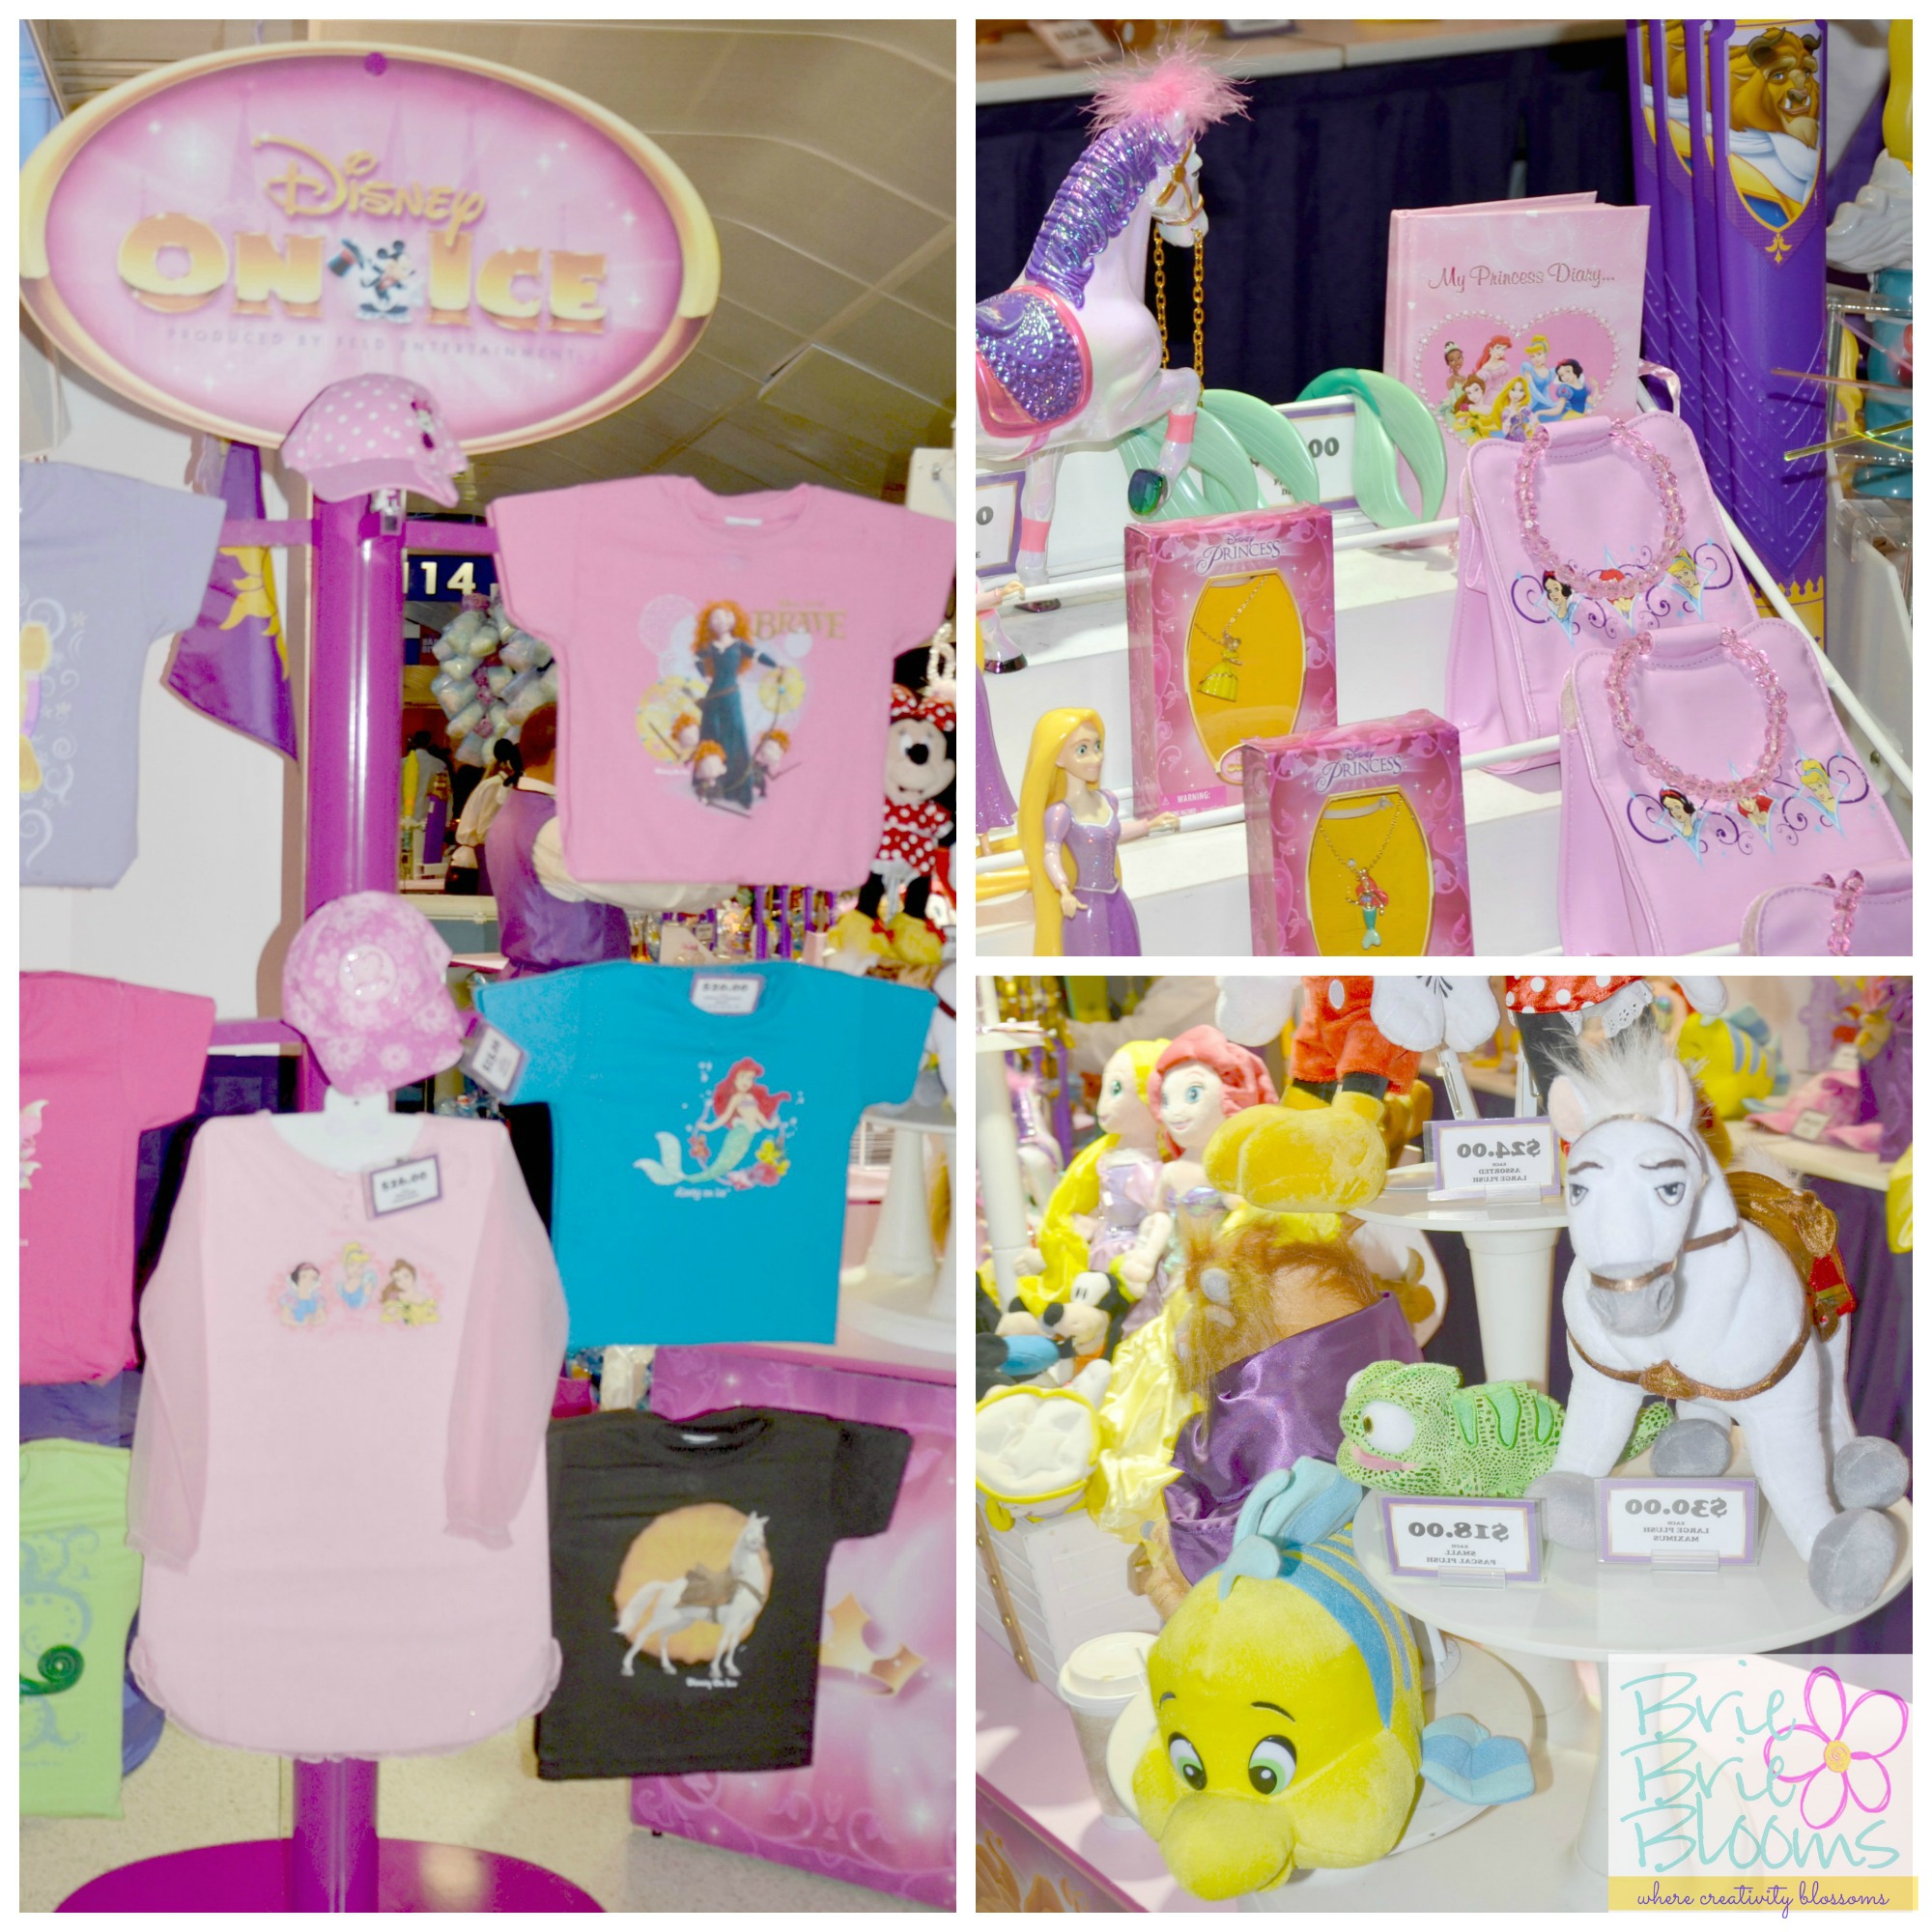 Merchandise at Disney On Ice Rockin' Ever After